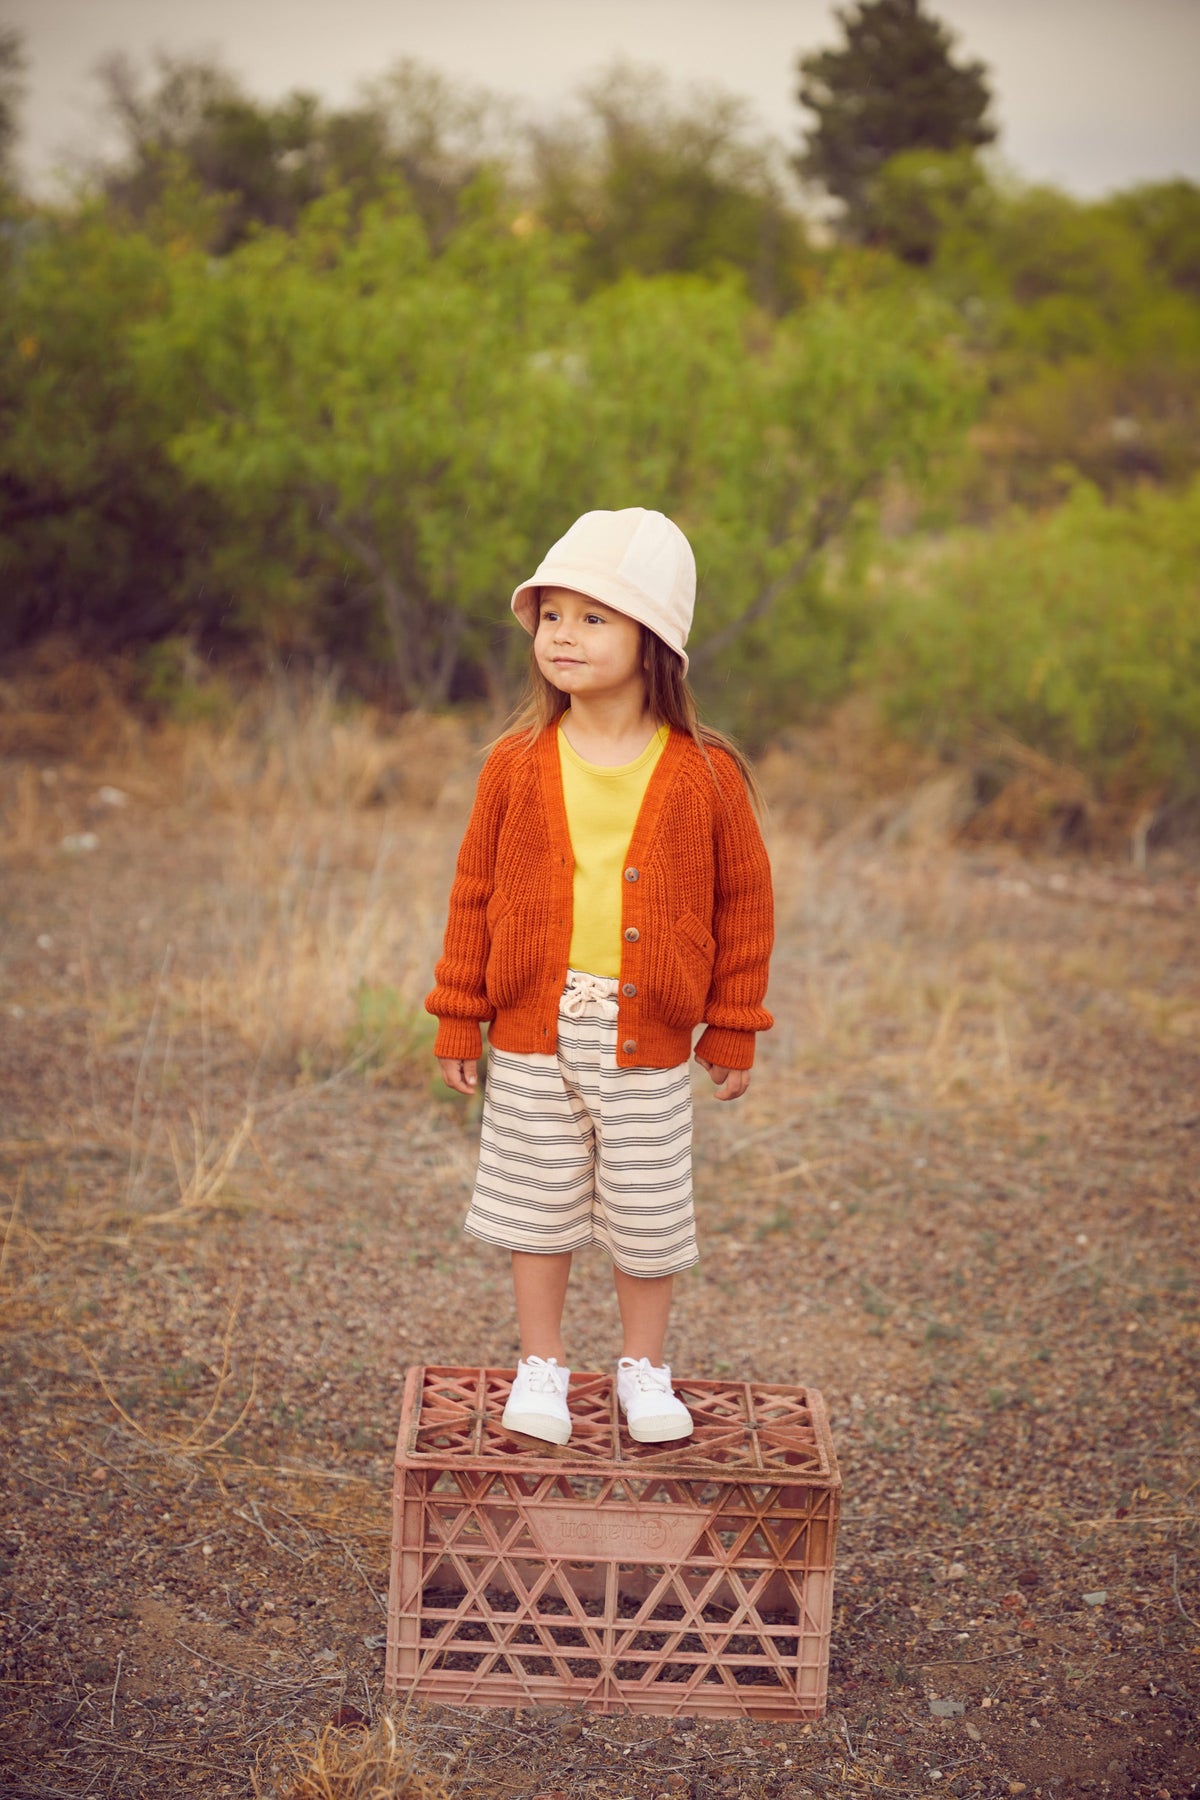 Fisherman Rib Everyday Cardigan - Marmalade+Model is 39 inches tall, 33lbs and wearing size 3-4y